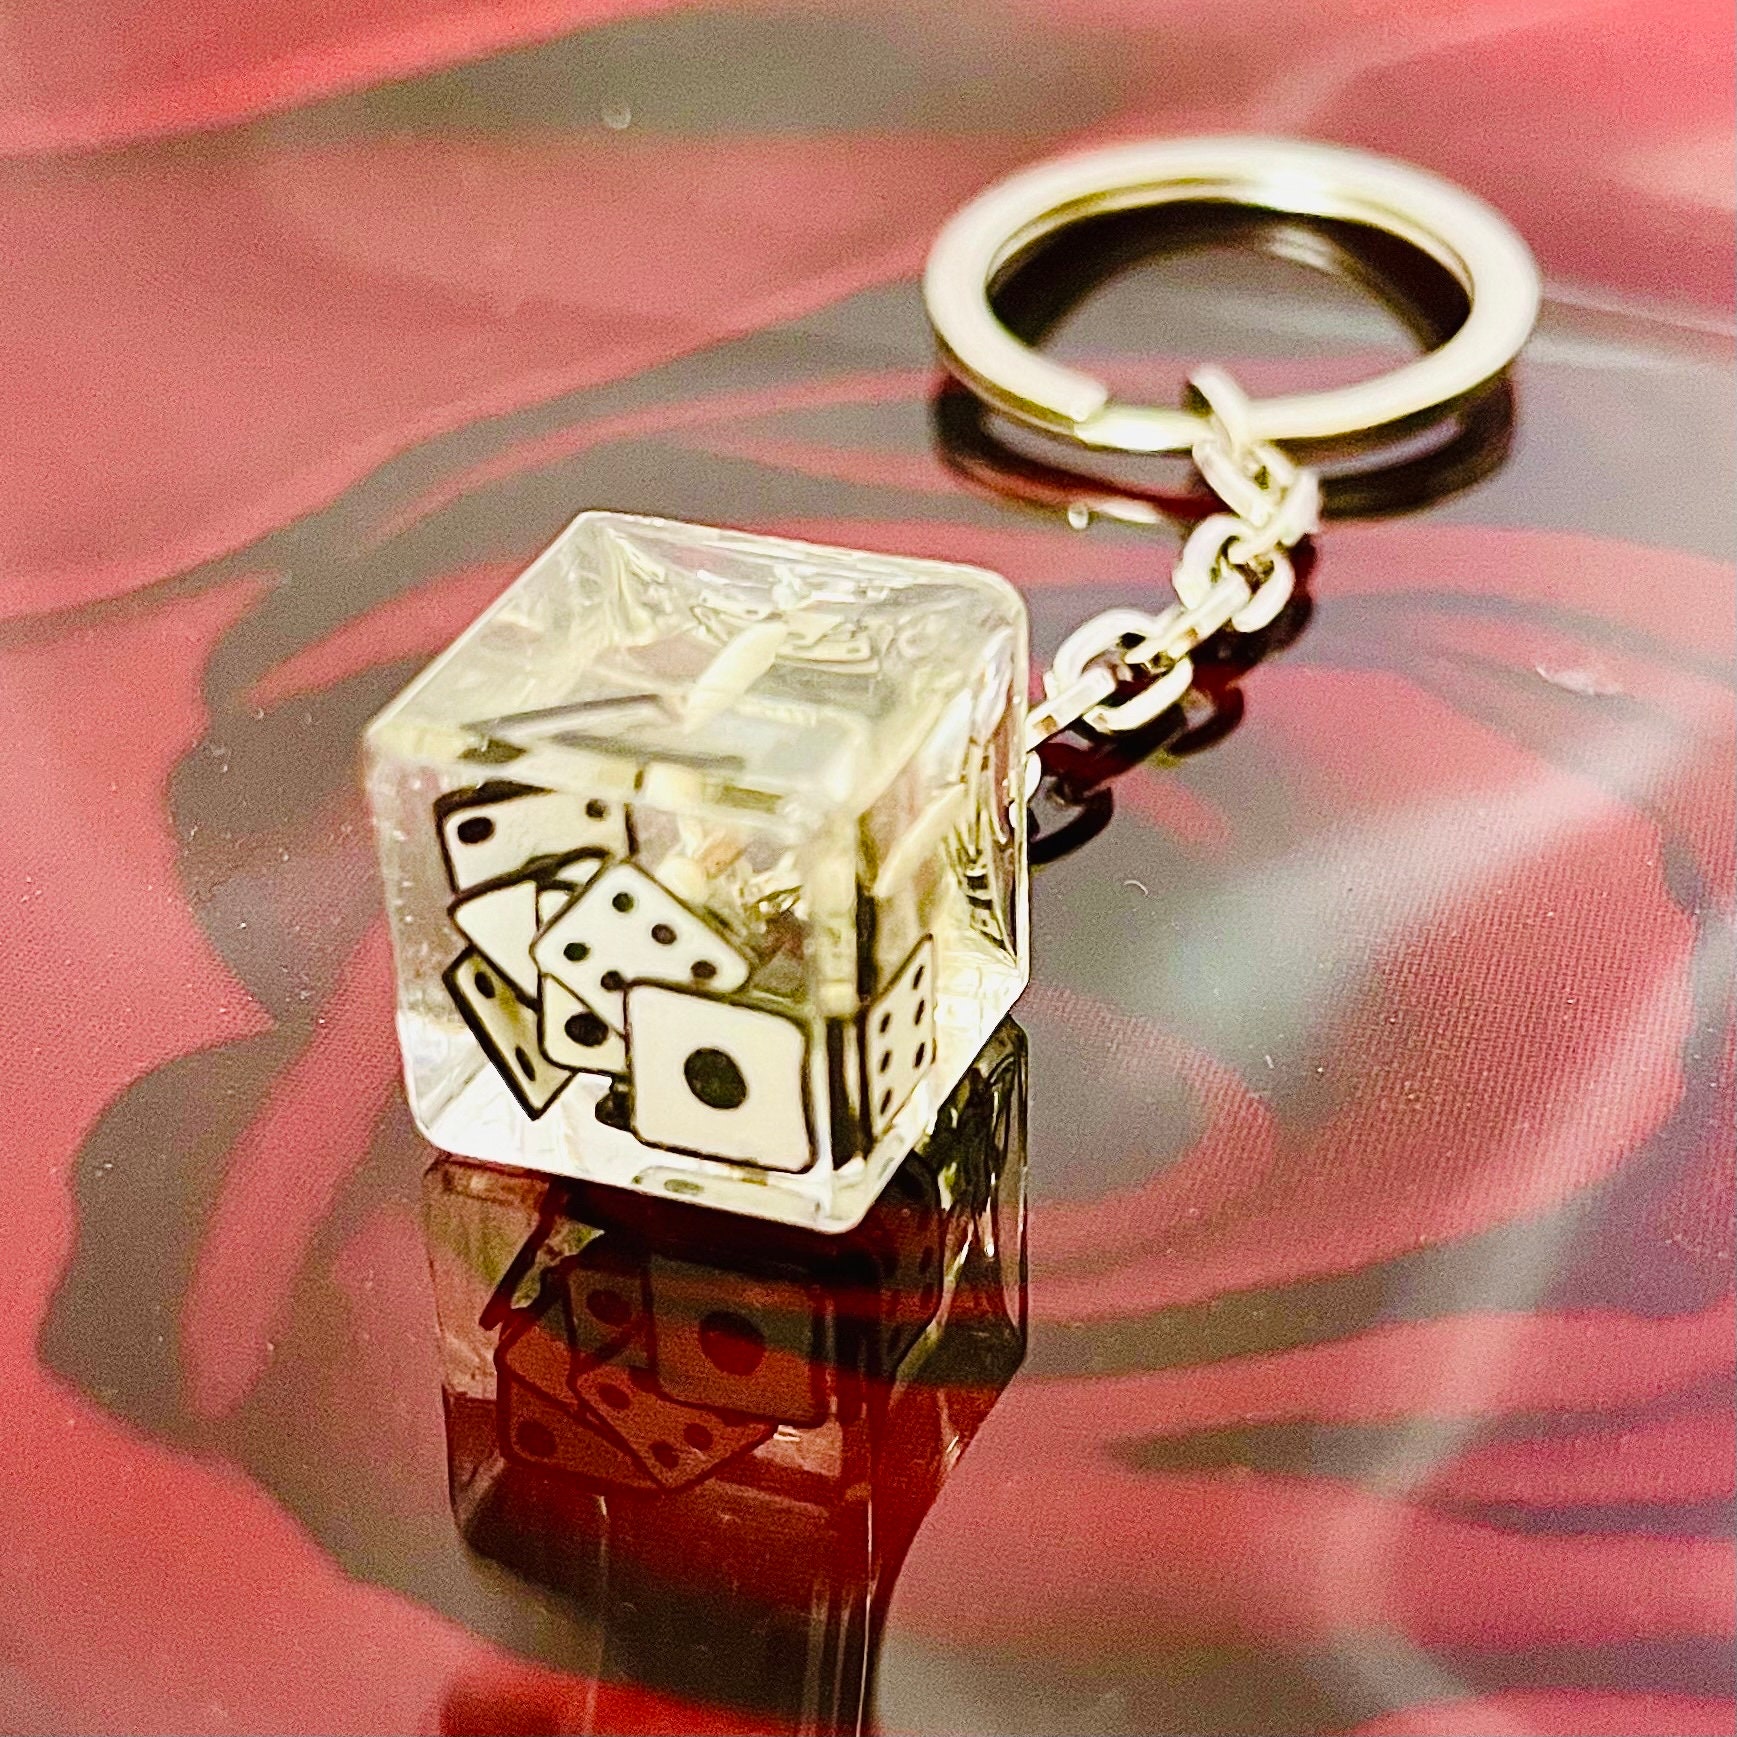 Dice Keychain Fashion Gamble Key Chain Ring Bag Pendants Car Decor  Accessories – buy at low prices in the Joom online store